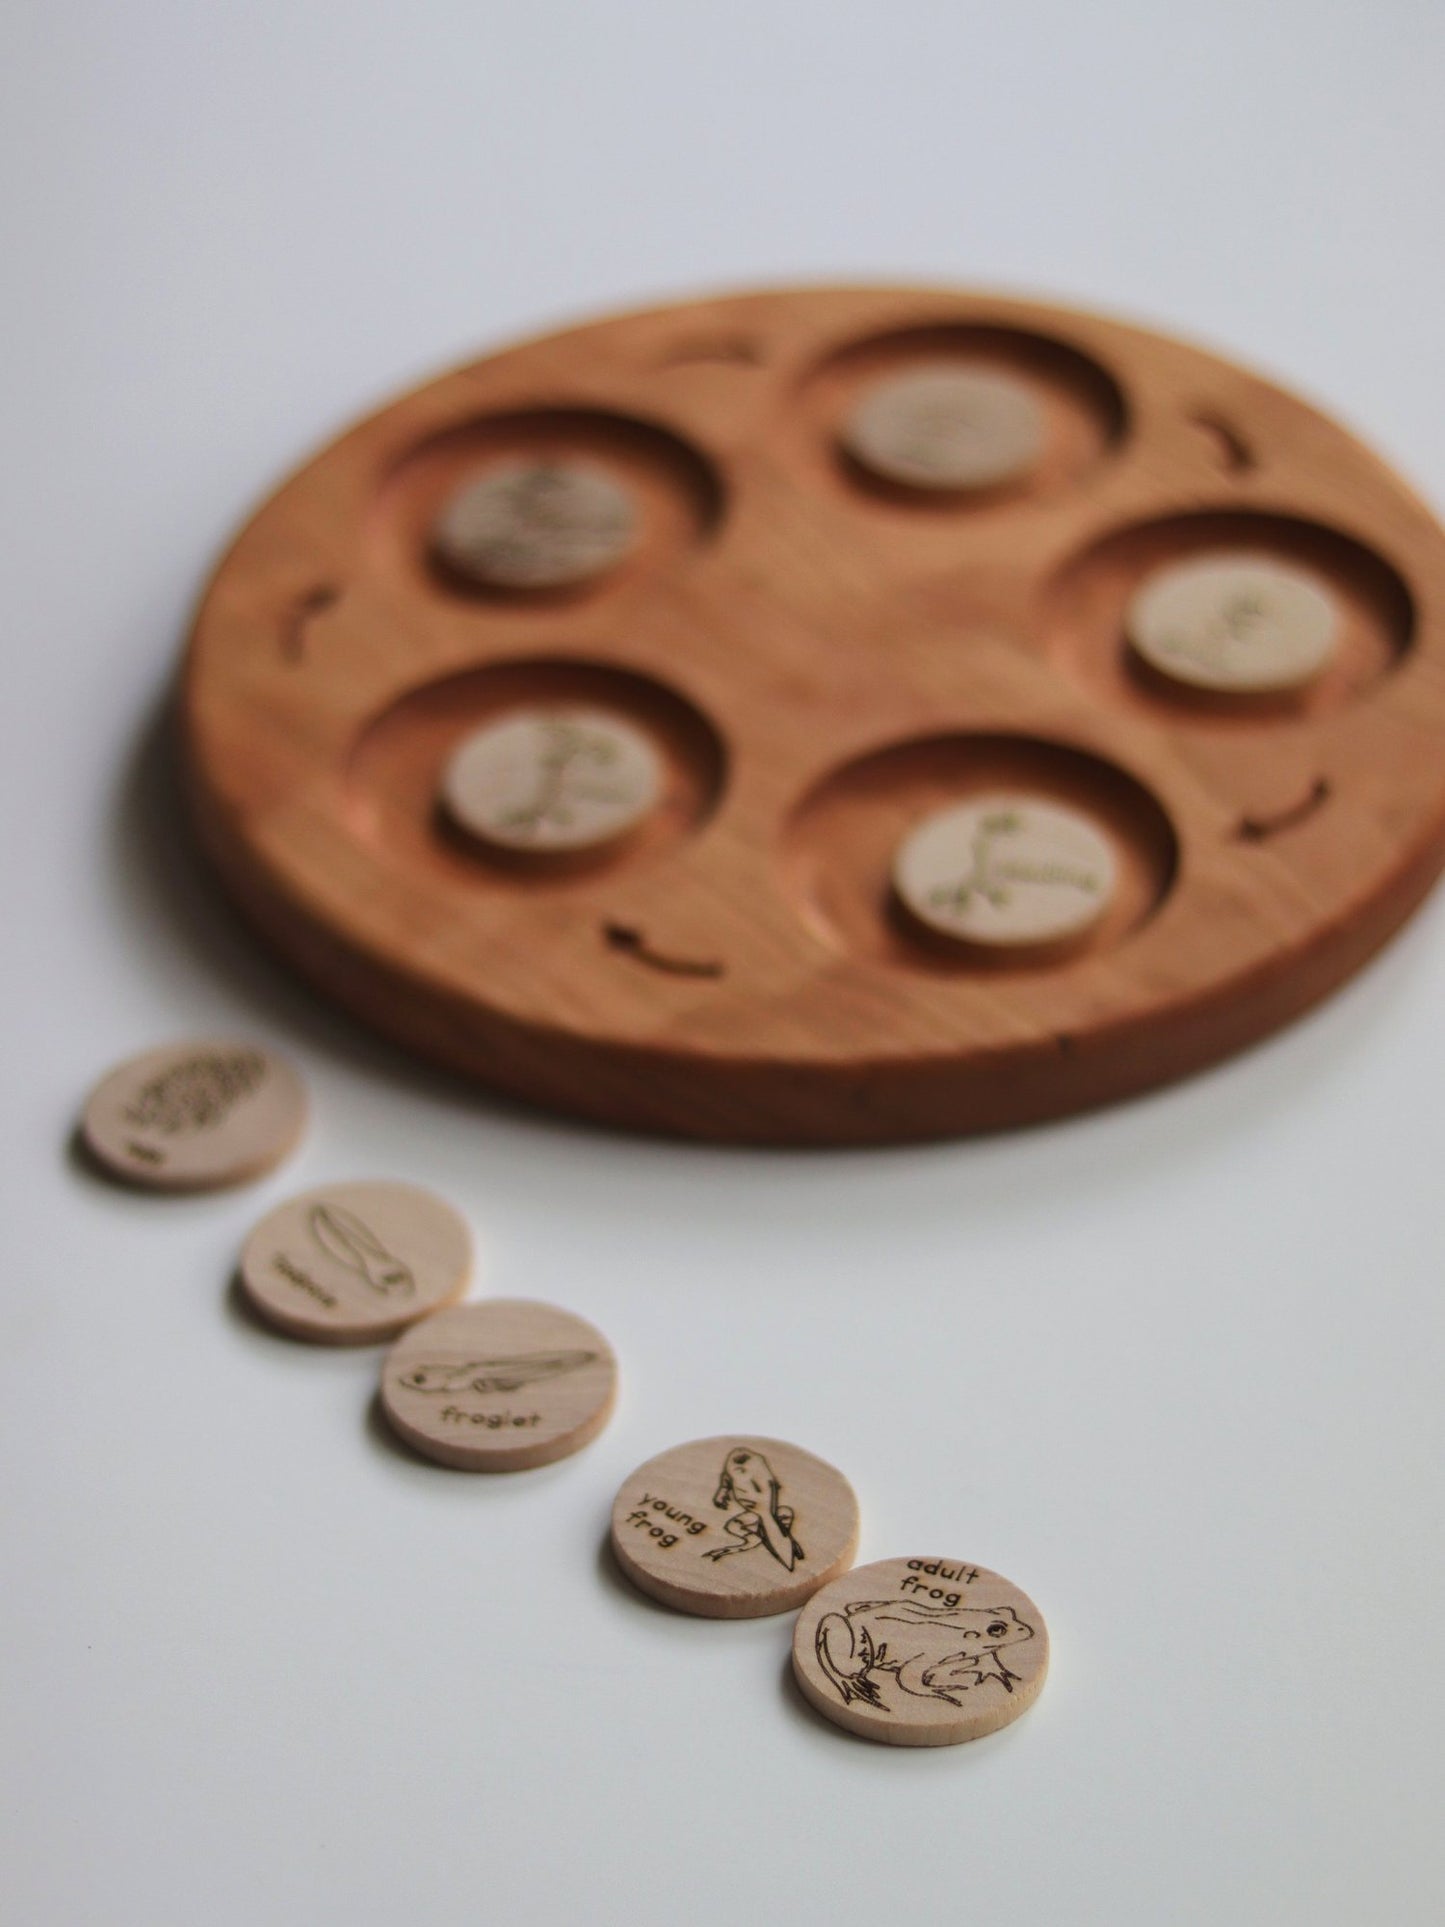 life cycle coins